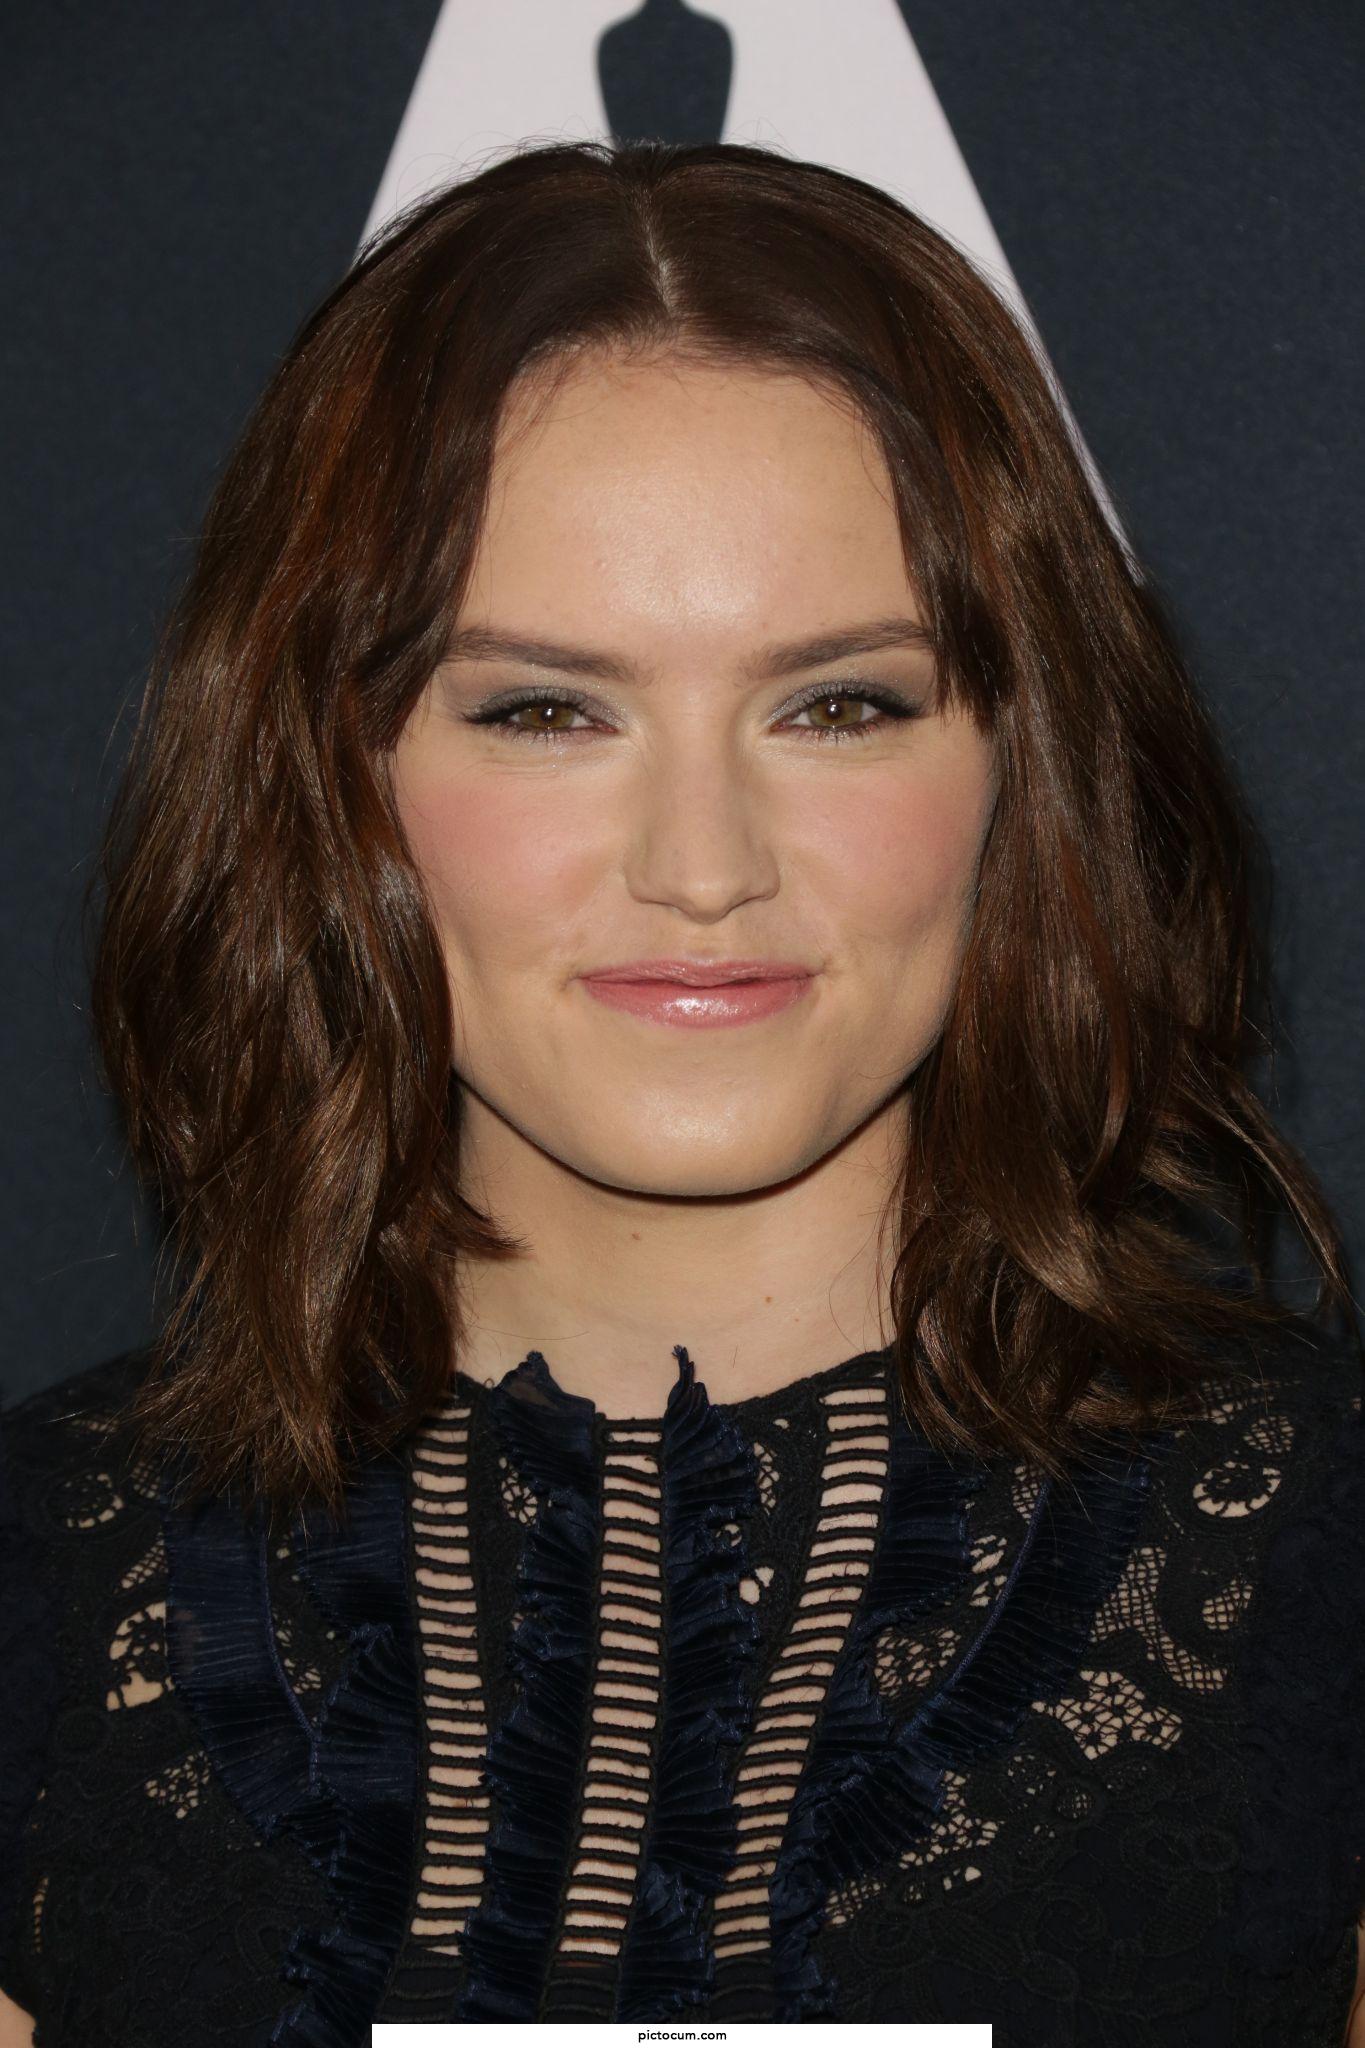 Daisy Ridley is way to hot